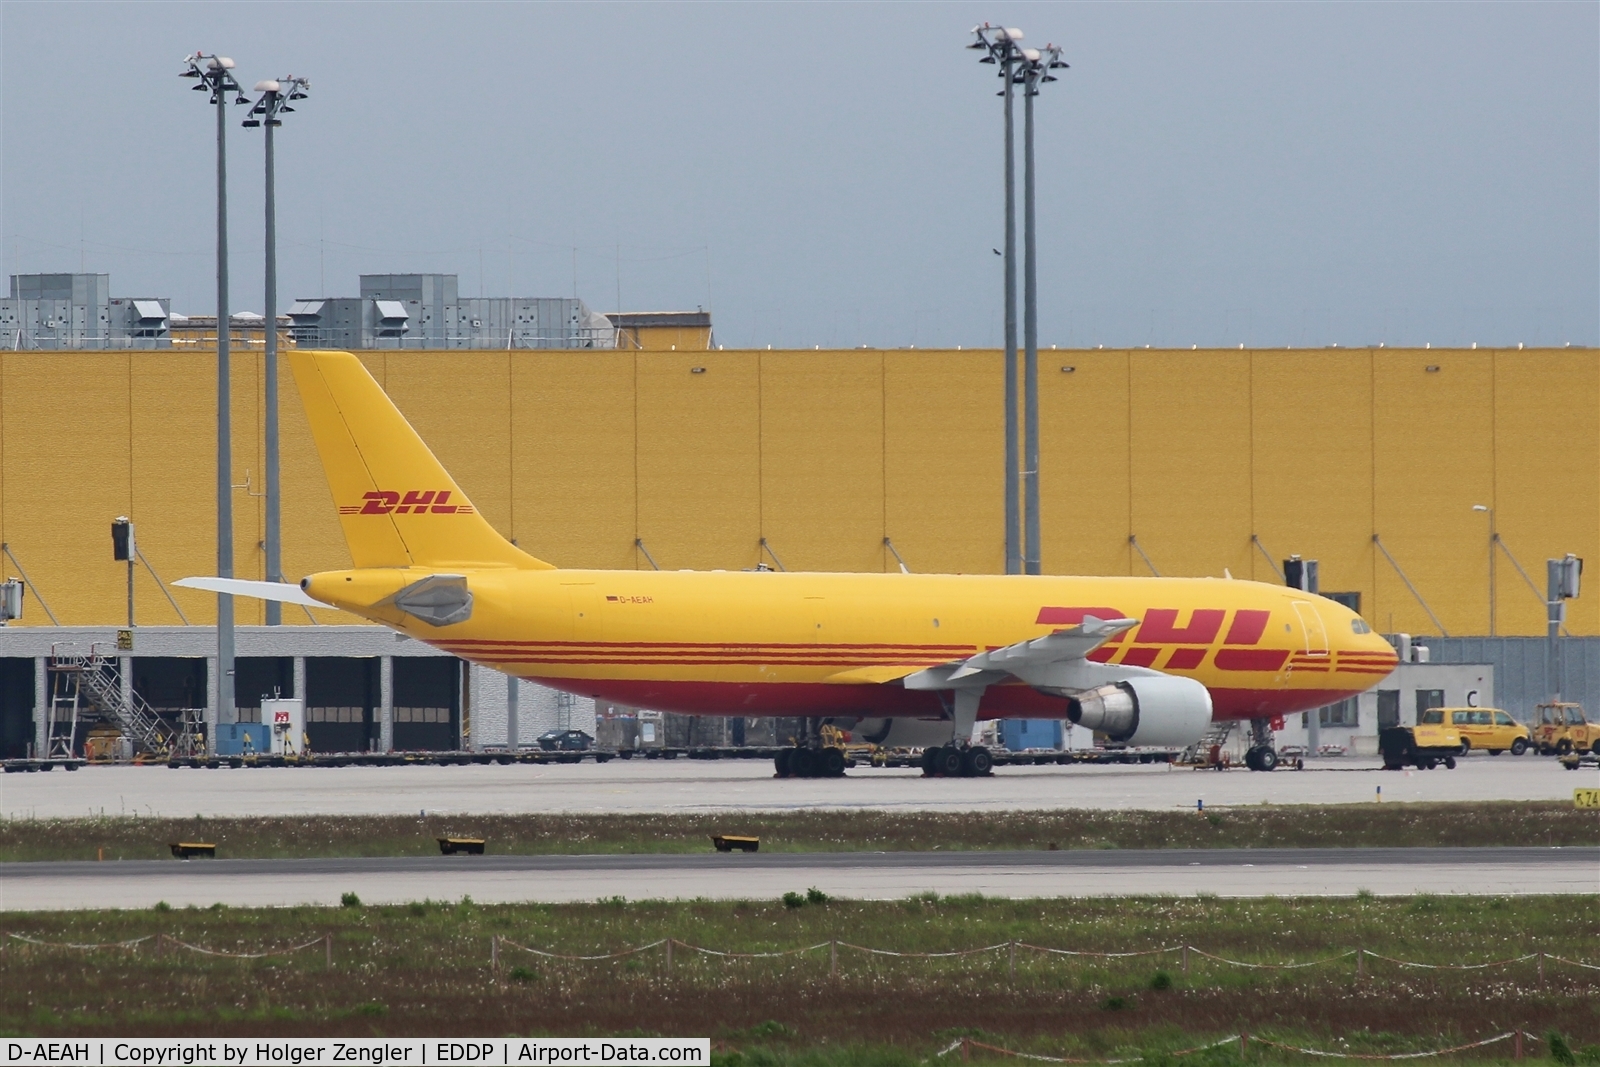 D-AEAH, 1998 Airbus A300B4-622R(F) C/N 783, Lonely freighter in yellow environment....